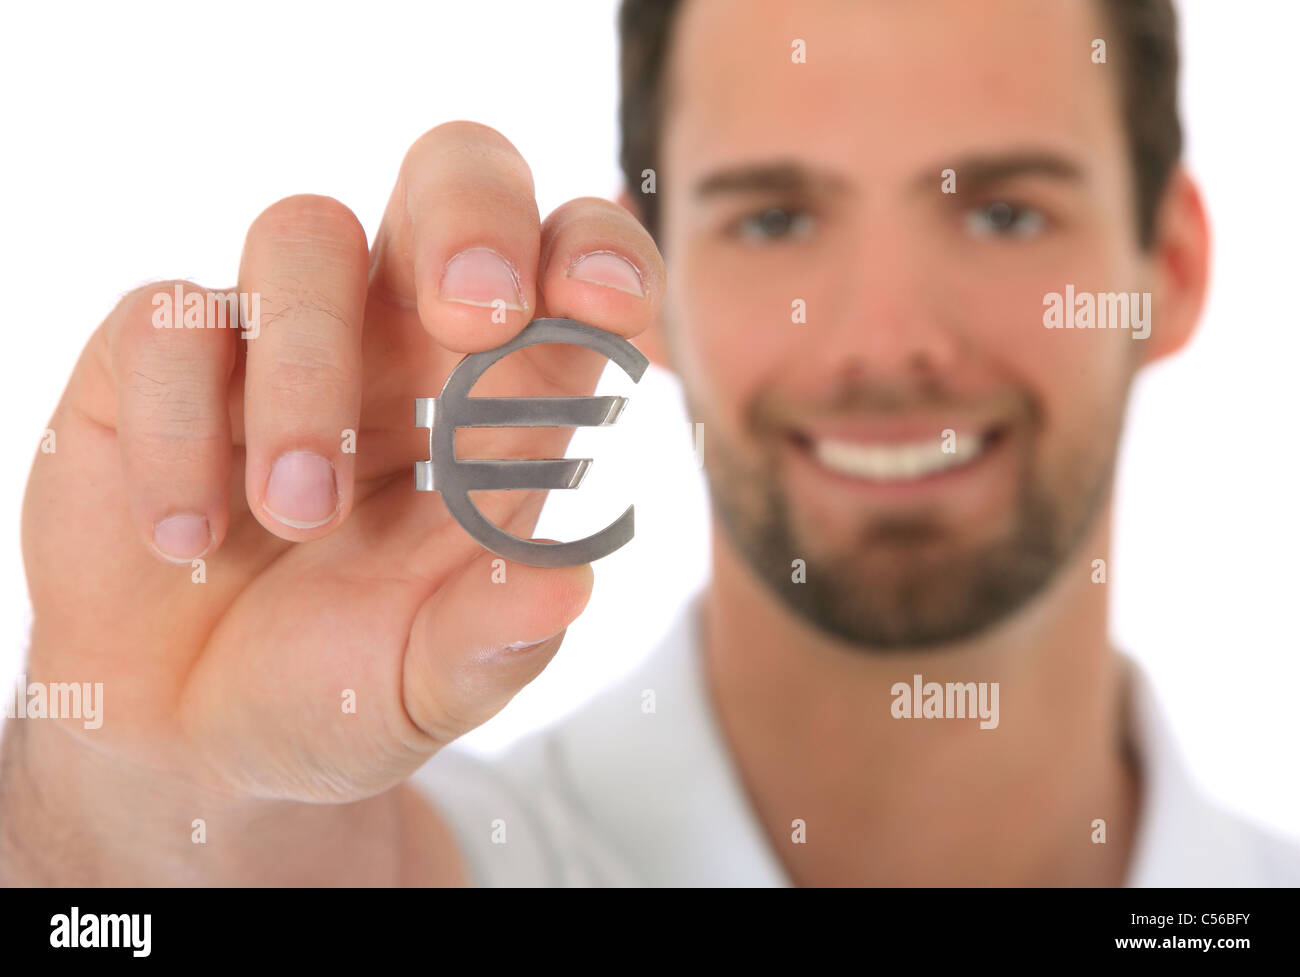 Portrait of a young man holding a Euro symbol. Selective focus on Euro symbol in foreground. All on white background. Stock Photo